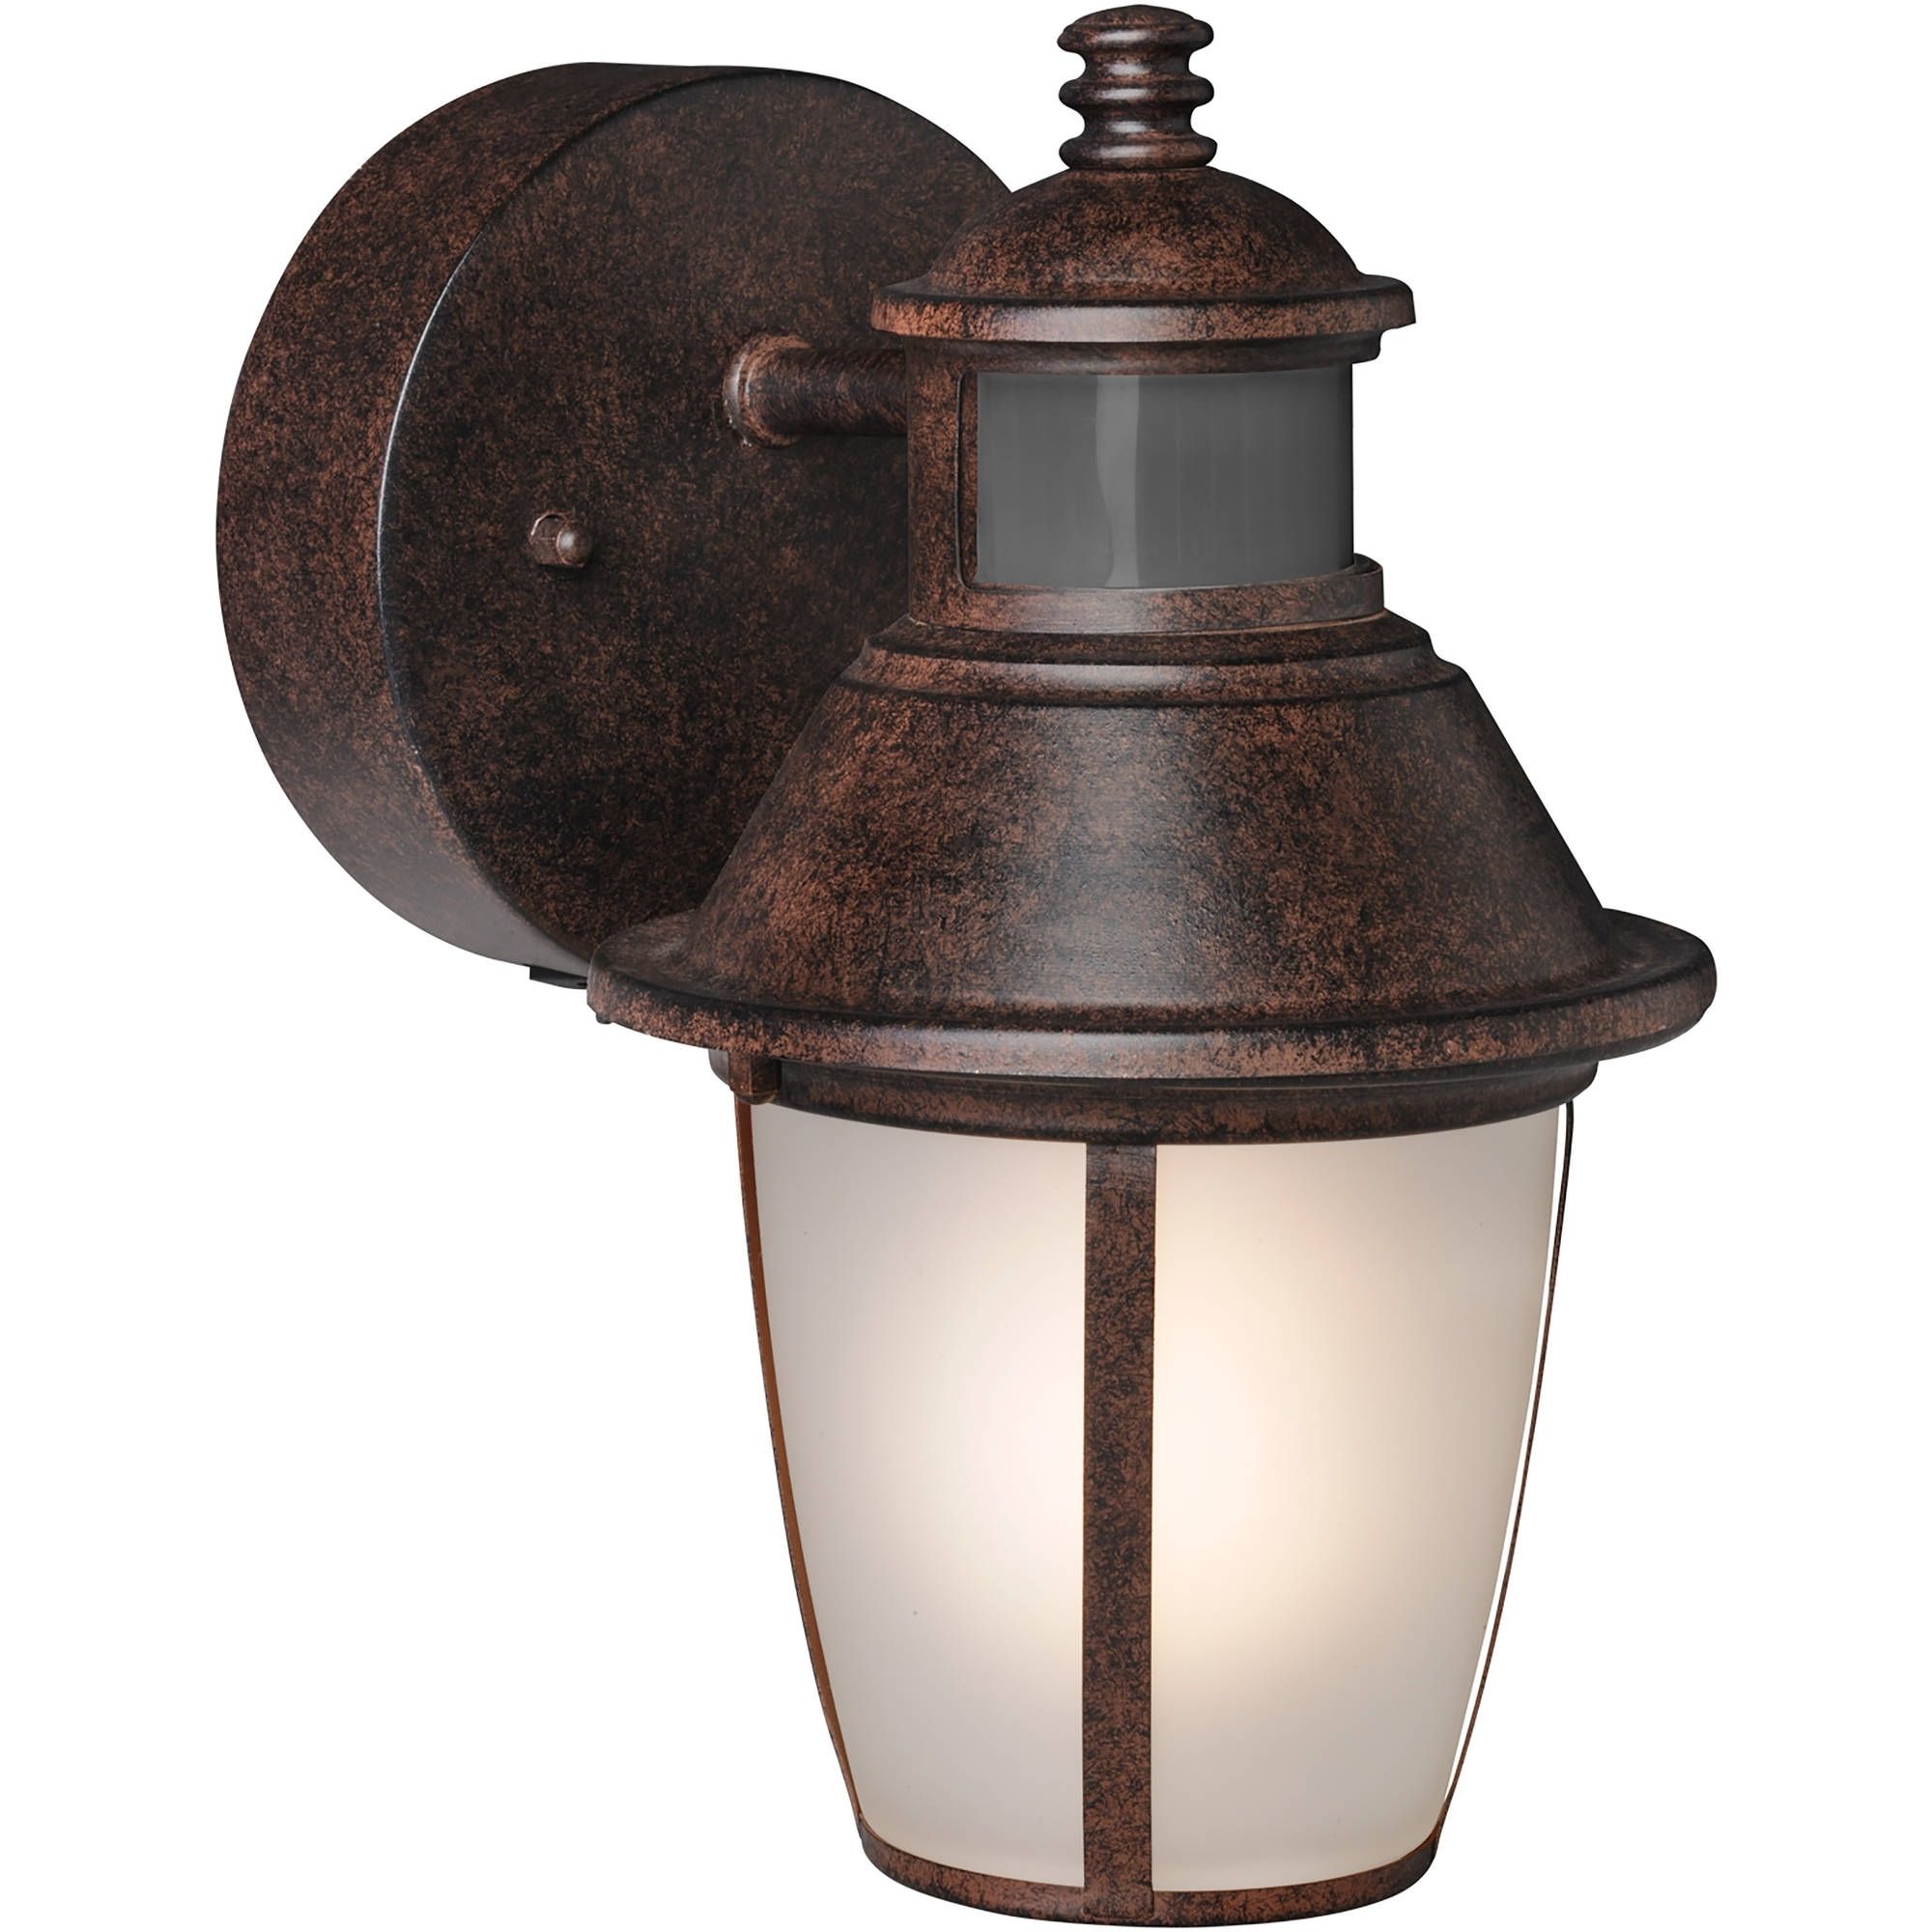 Brink's Led Outdoor Wall Lantern Motion Security Light, Bronze With Regard To Outdoor Wall Security Lights (View 13 of 15)